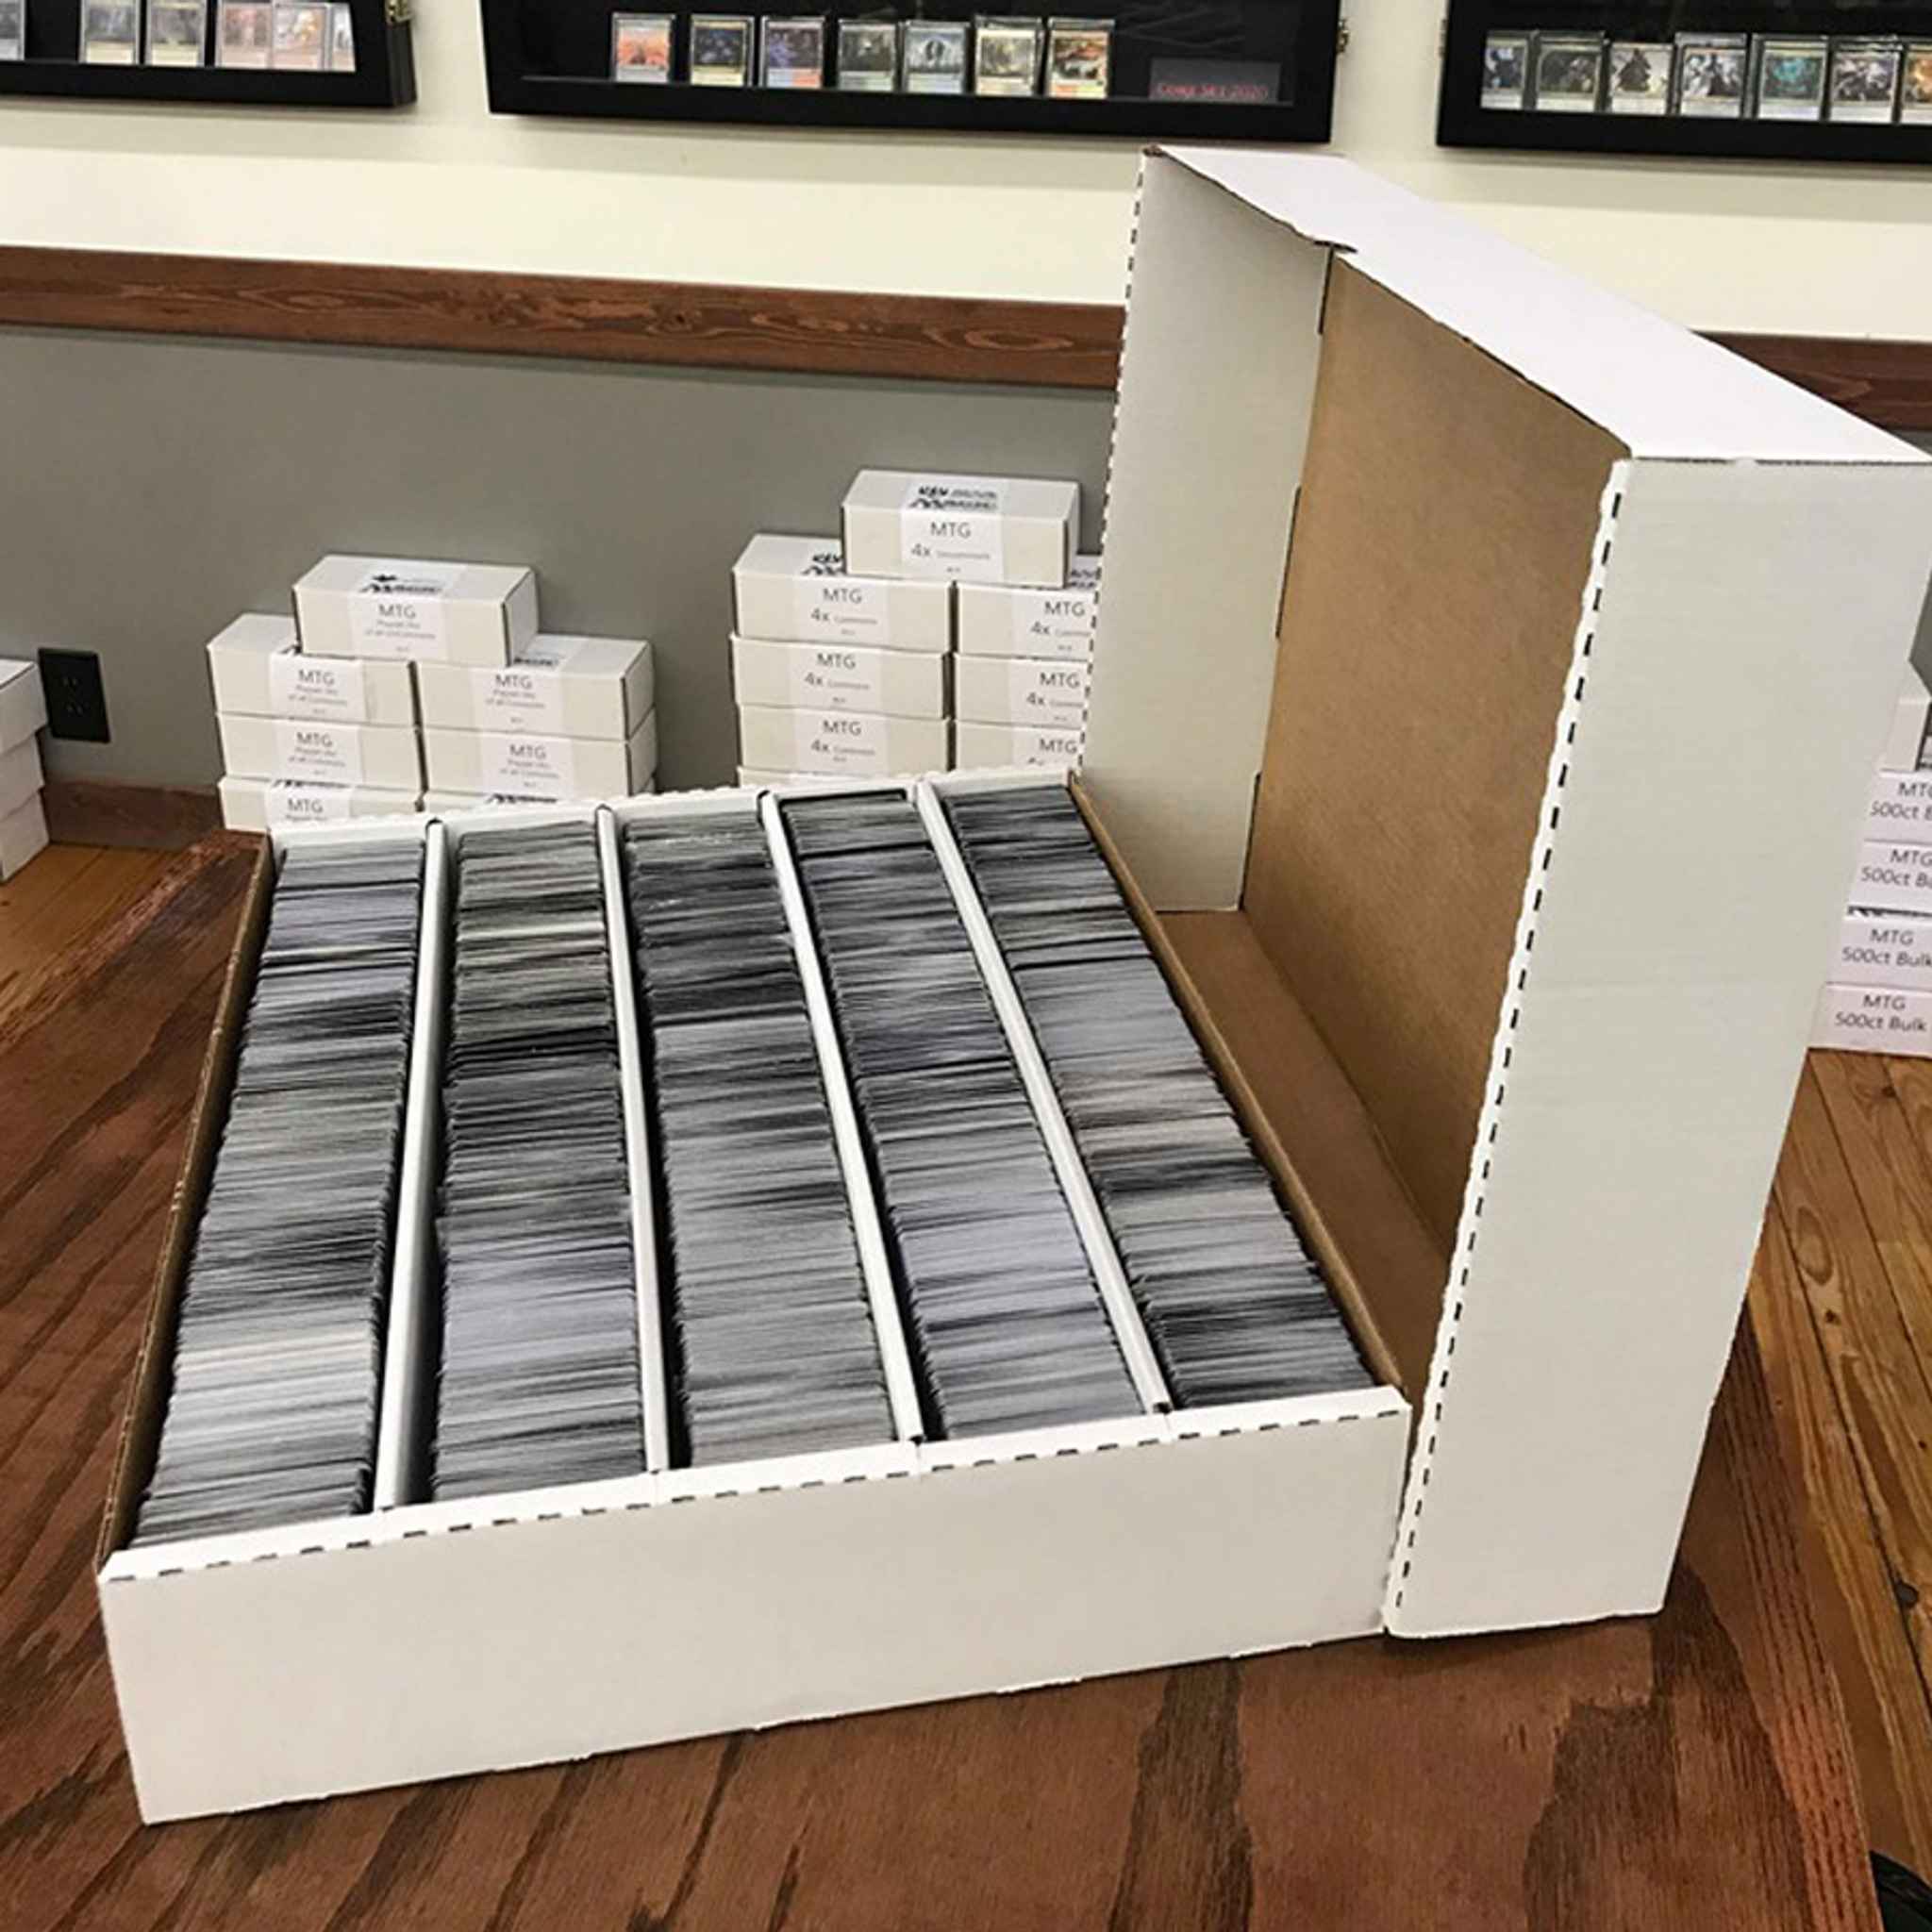 6 000 Mtg Cards Over 1000 Magic The Gathering Bulk Card Lot Magic The Gathering Bulk Card Lots Bulk Lots Online Gaming Store For Cards Miniatures Singles Packs Booster Boxes